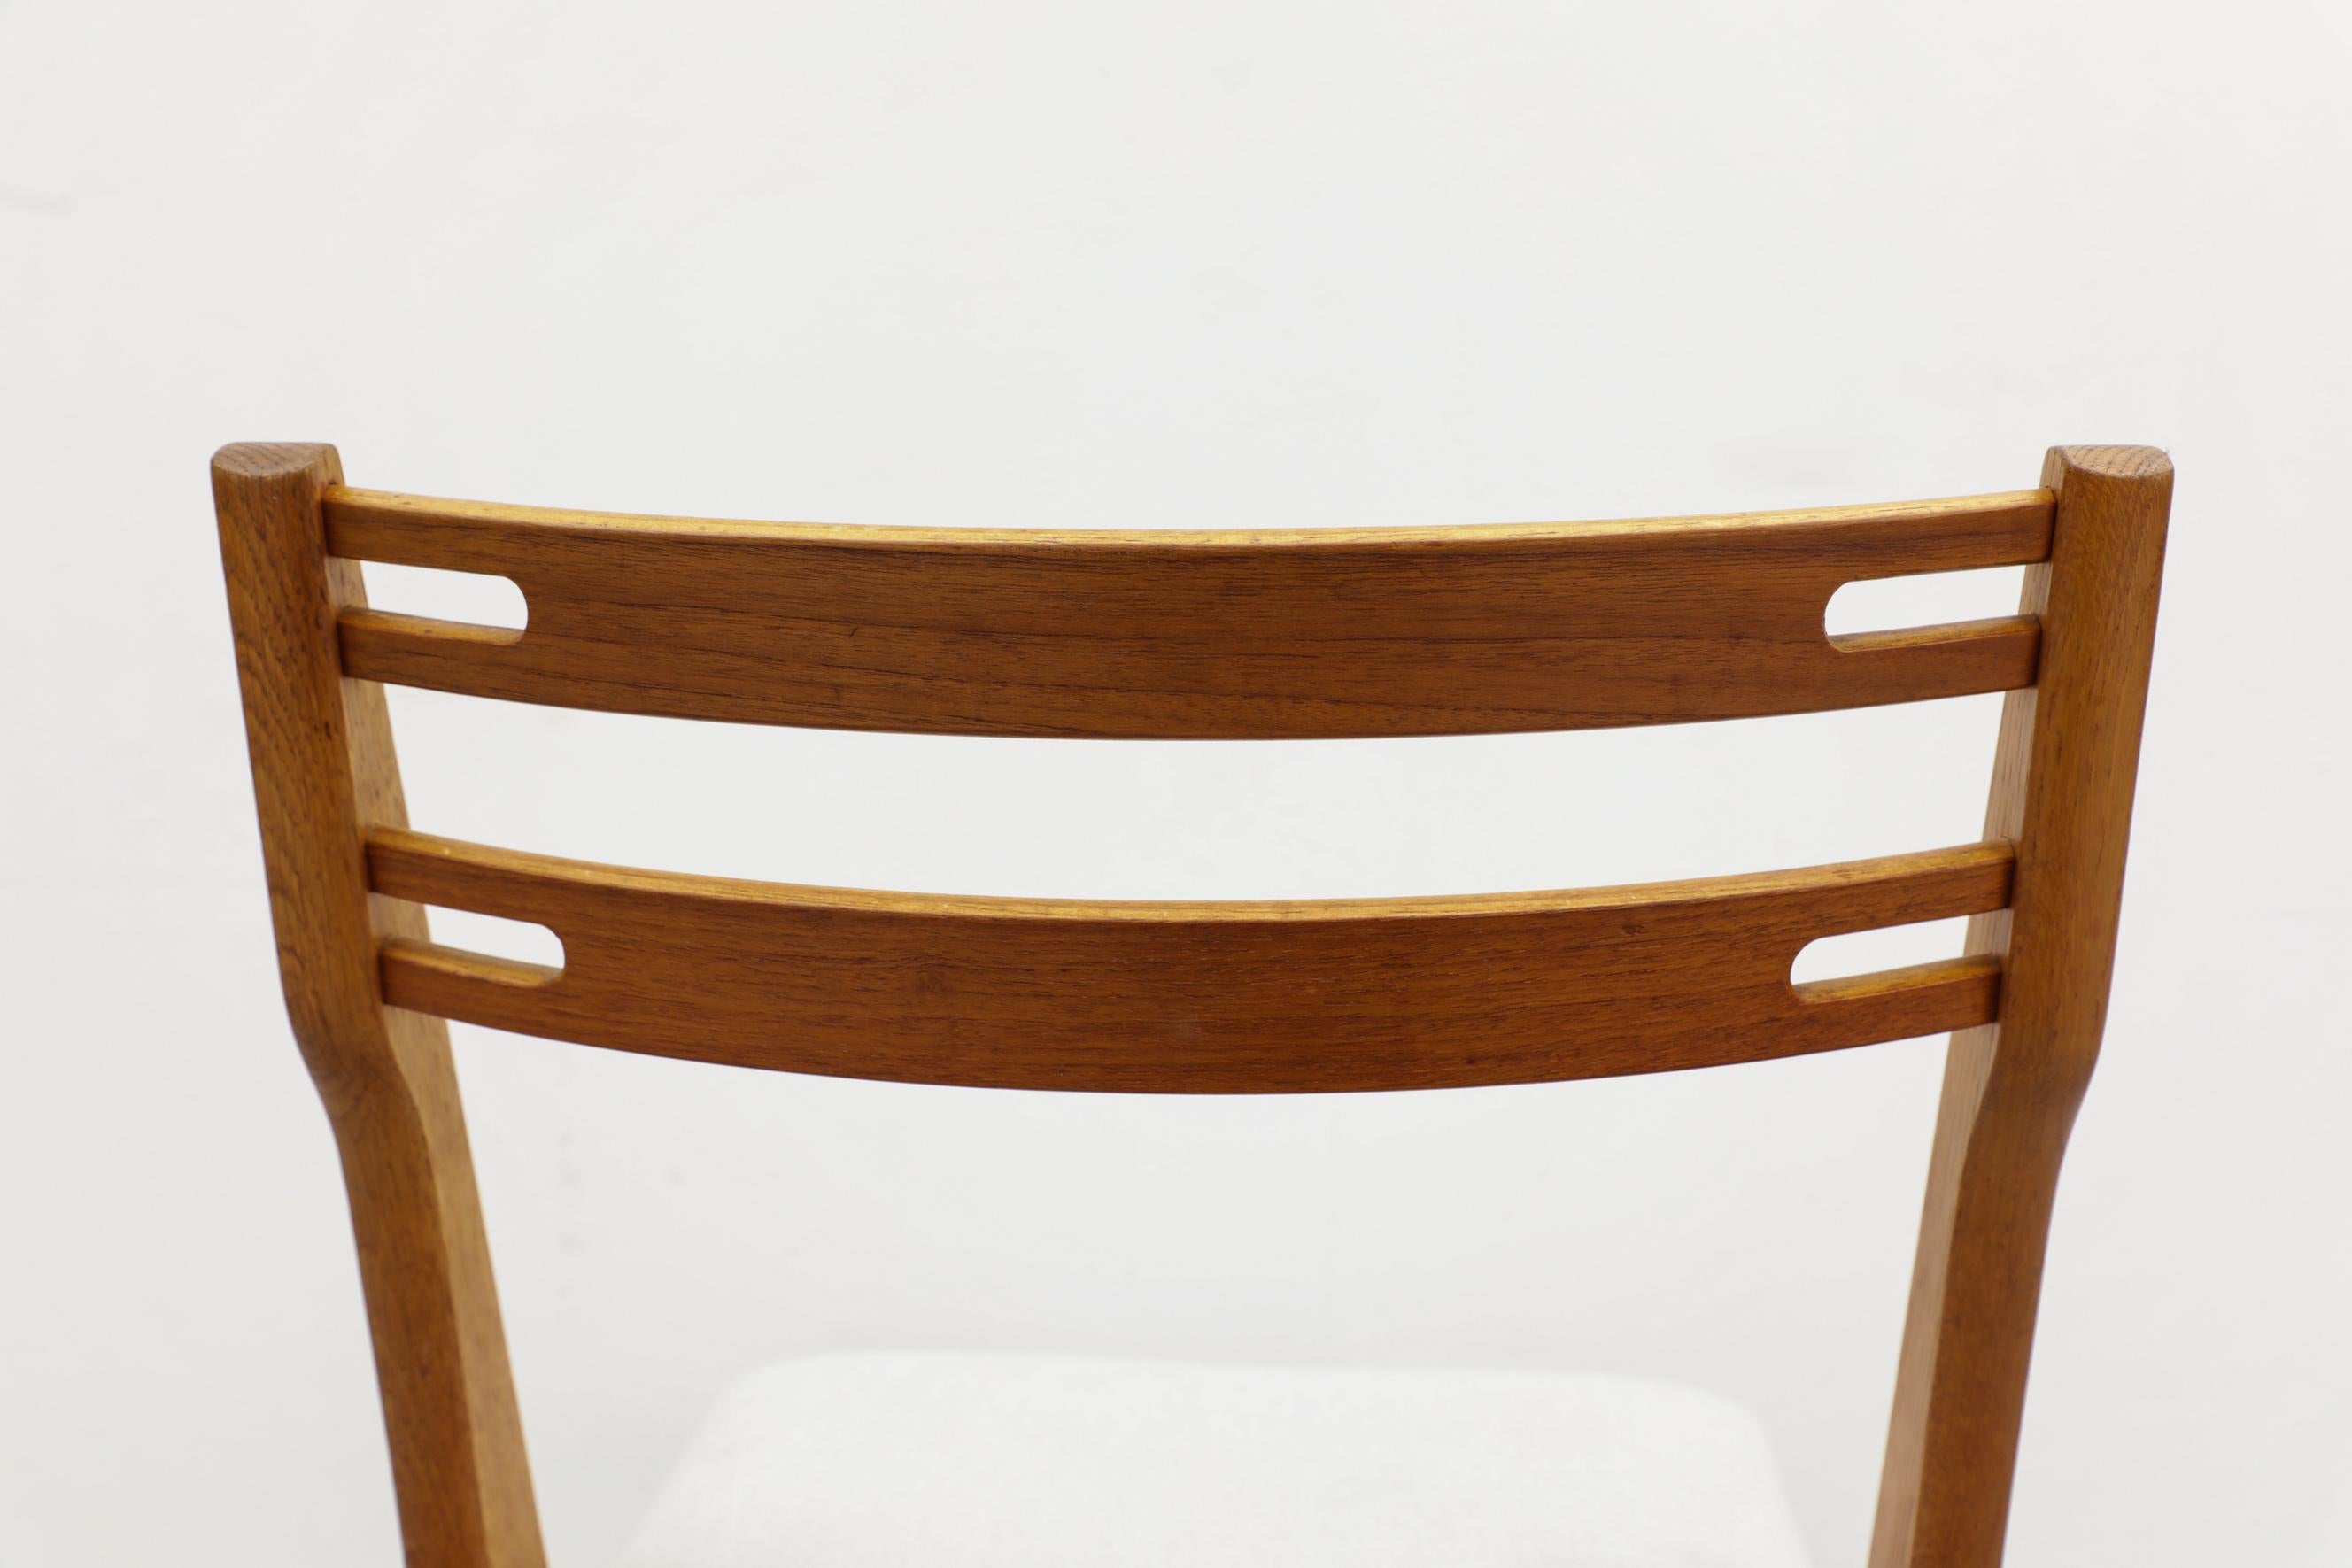 Single Hans Wegner Inspired Oak Dining Chair with Compass Legs and Bowed Back For Sale 6